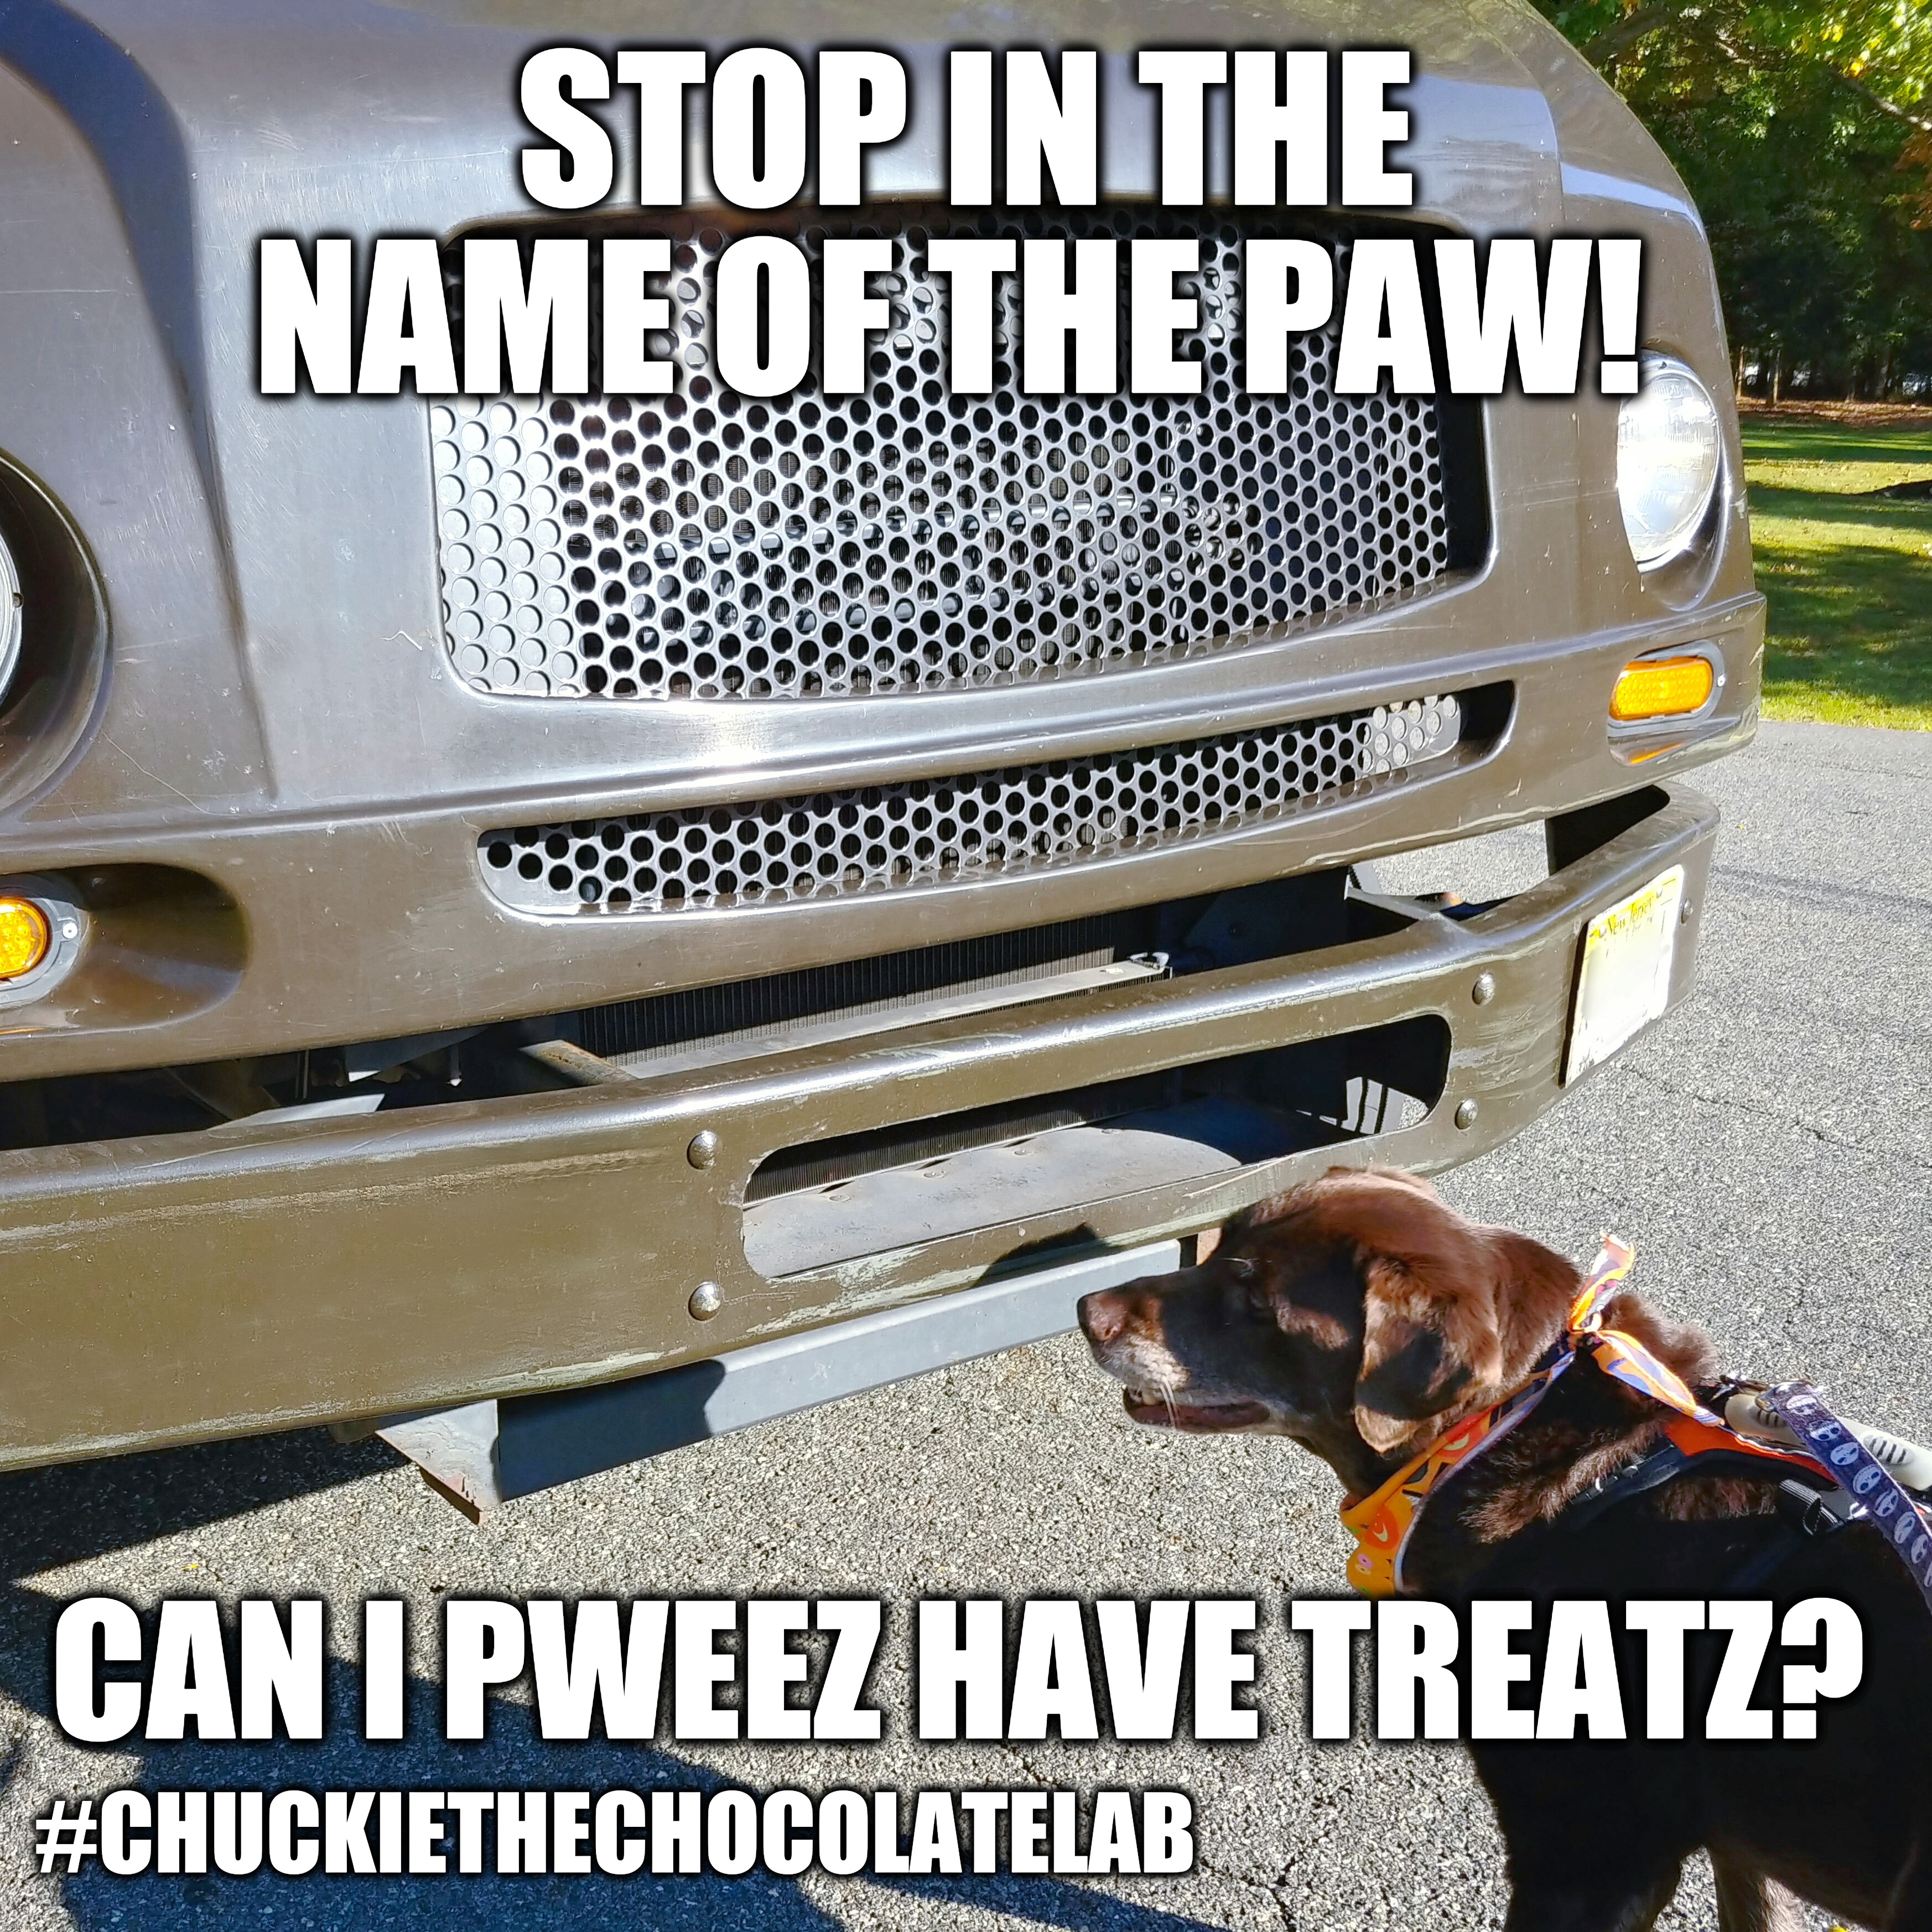 Ups drivers are a dog's best friend | STOP IN THE NAME OF THE PAW! CAN I PWEEZ HAVE TREATZ? #CHUCKIETHECHOCOLATELAB | image tagged in chuckie the chocolate lab,ups,treats,dogs,funny,memes | made w/ Imgflip meme maker